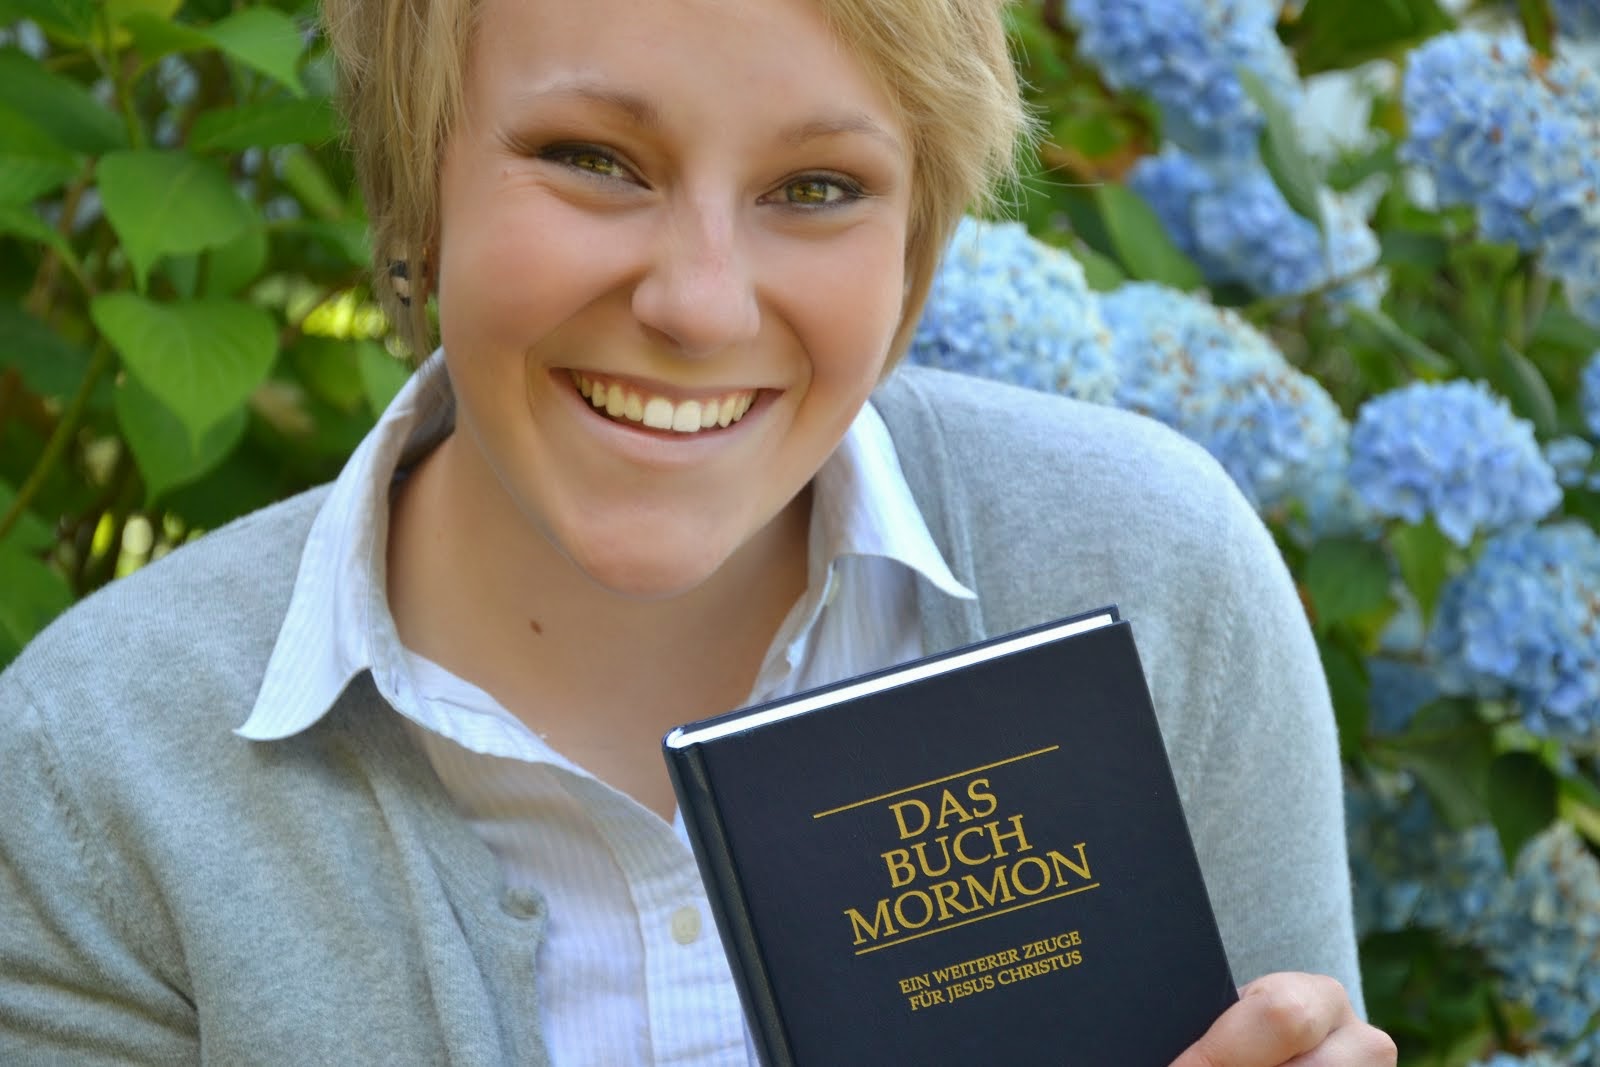 Our Missionary: Sister Michaela Shurts